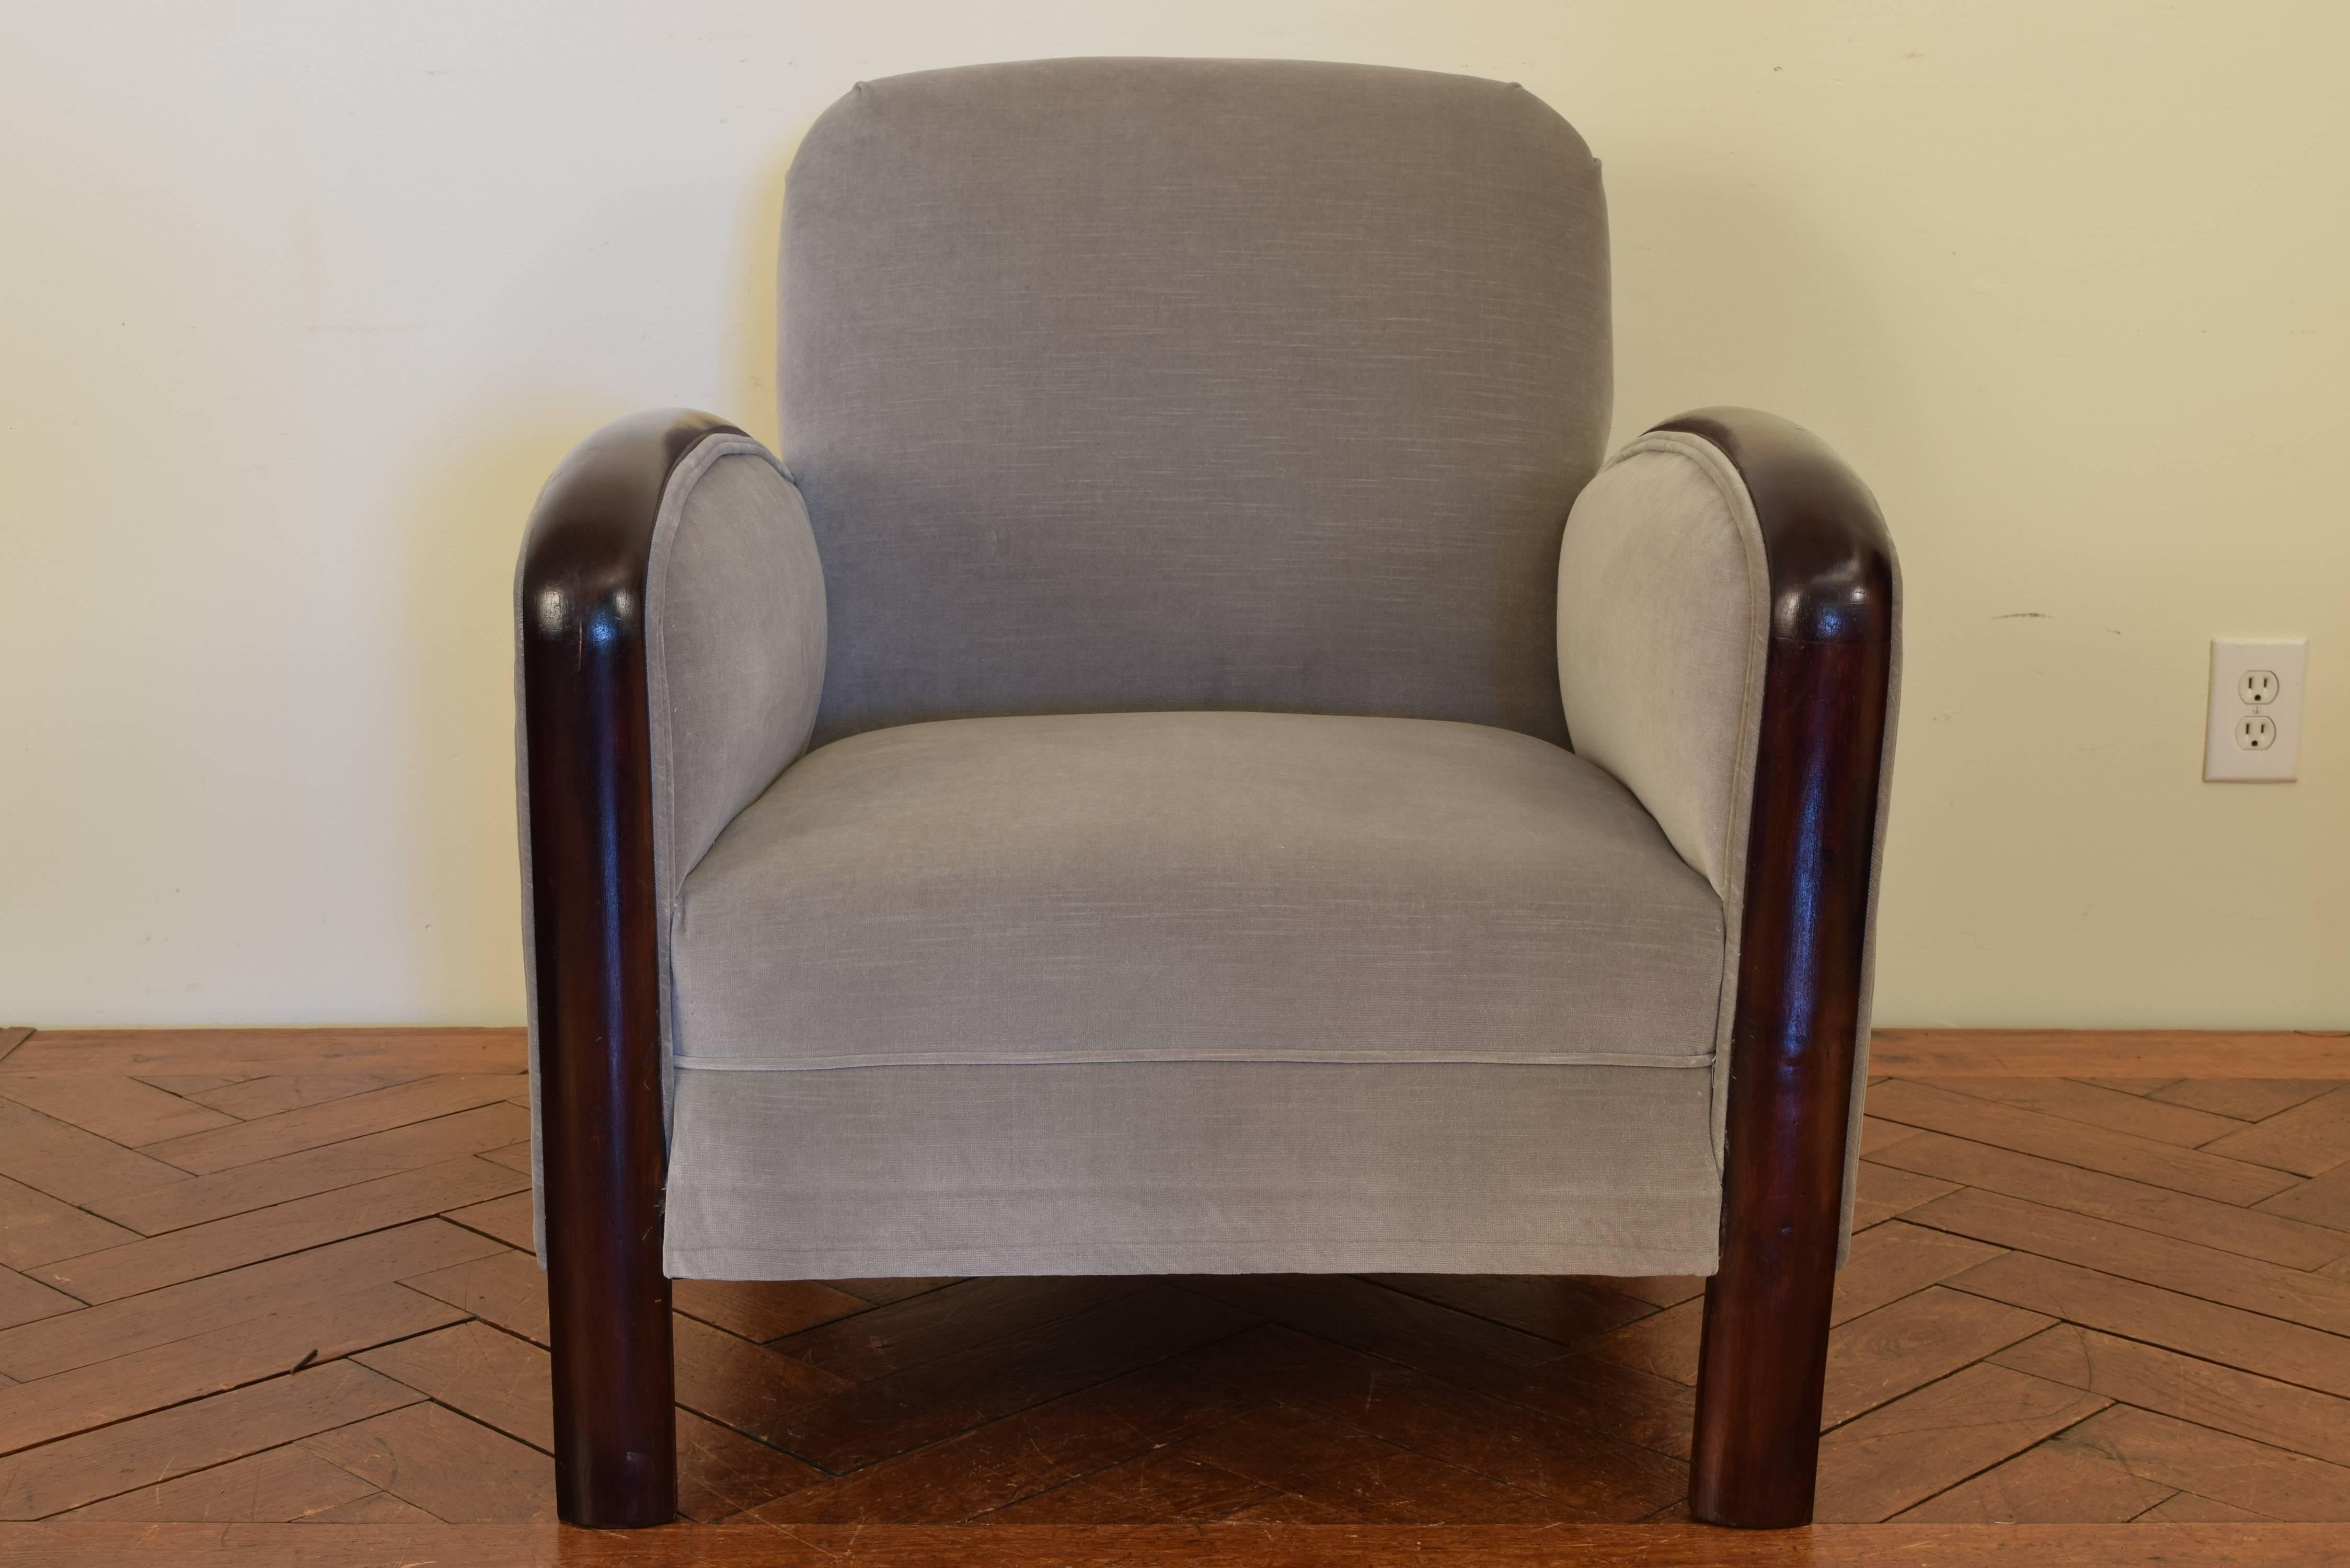 Having a sloped backrest and high flaring sides, the tight cushion raised on rounded legs.